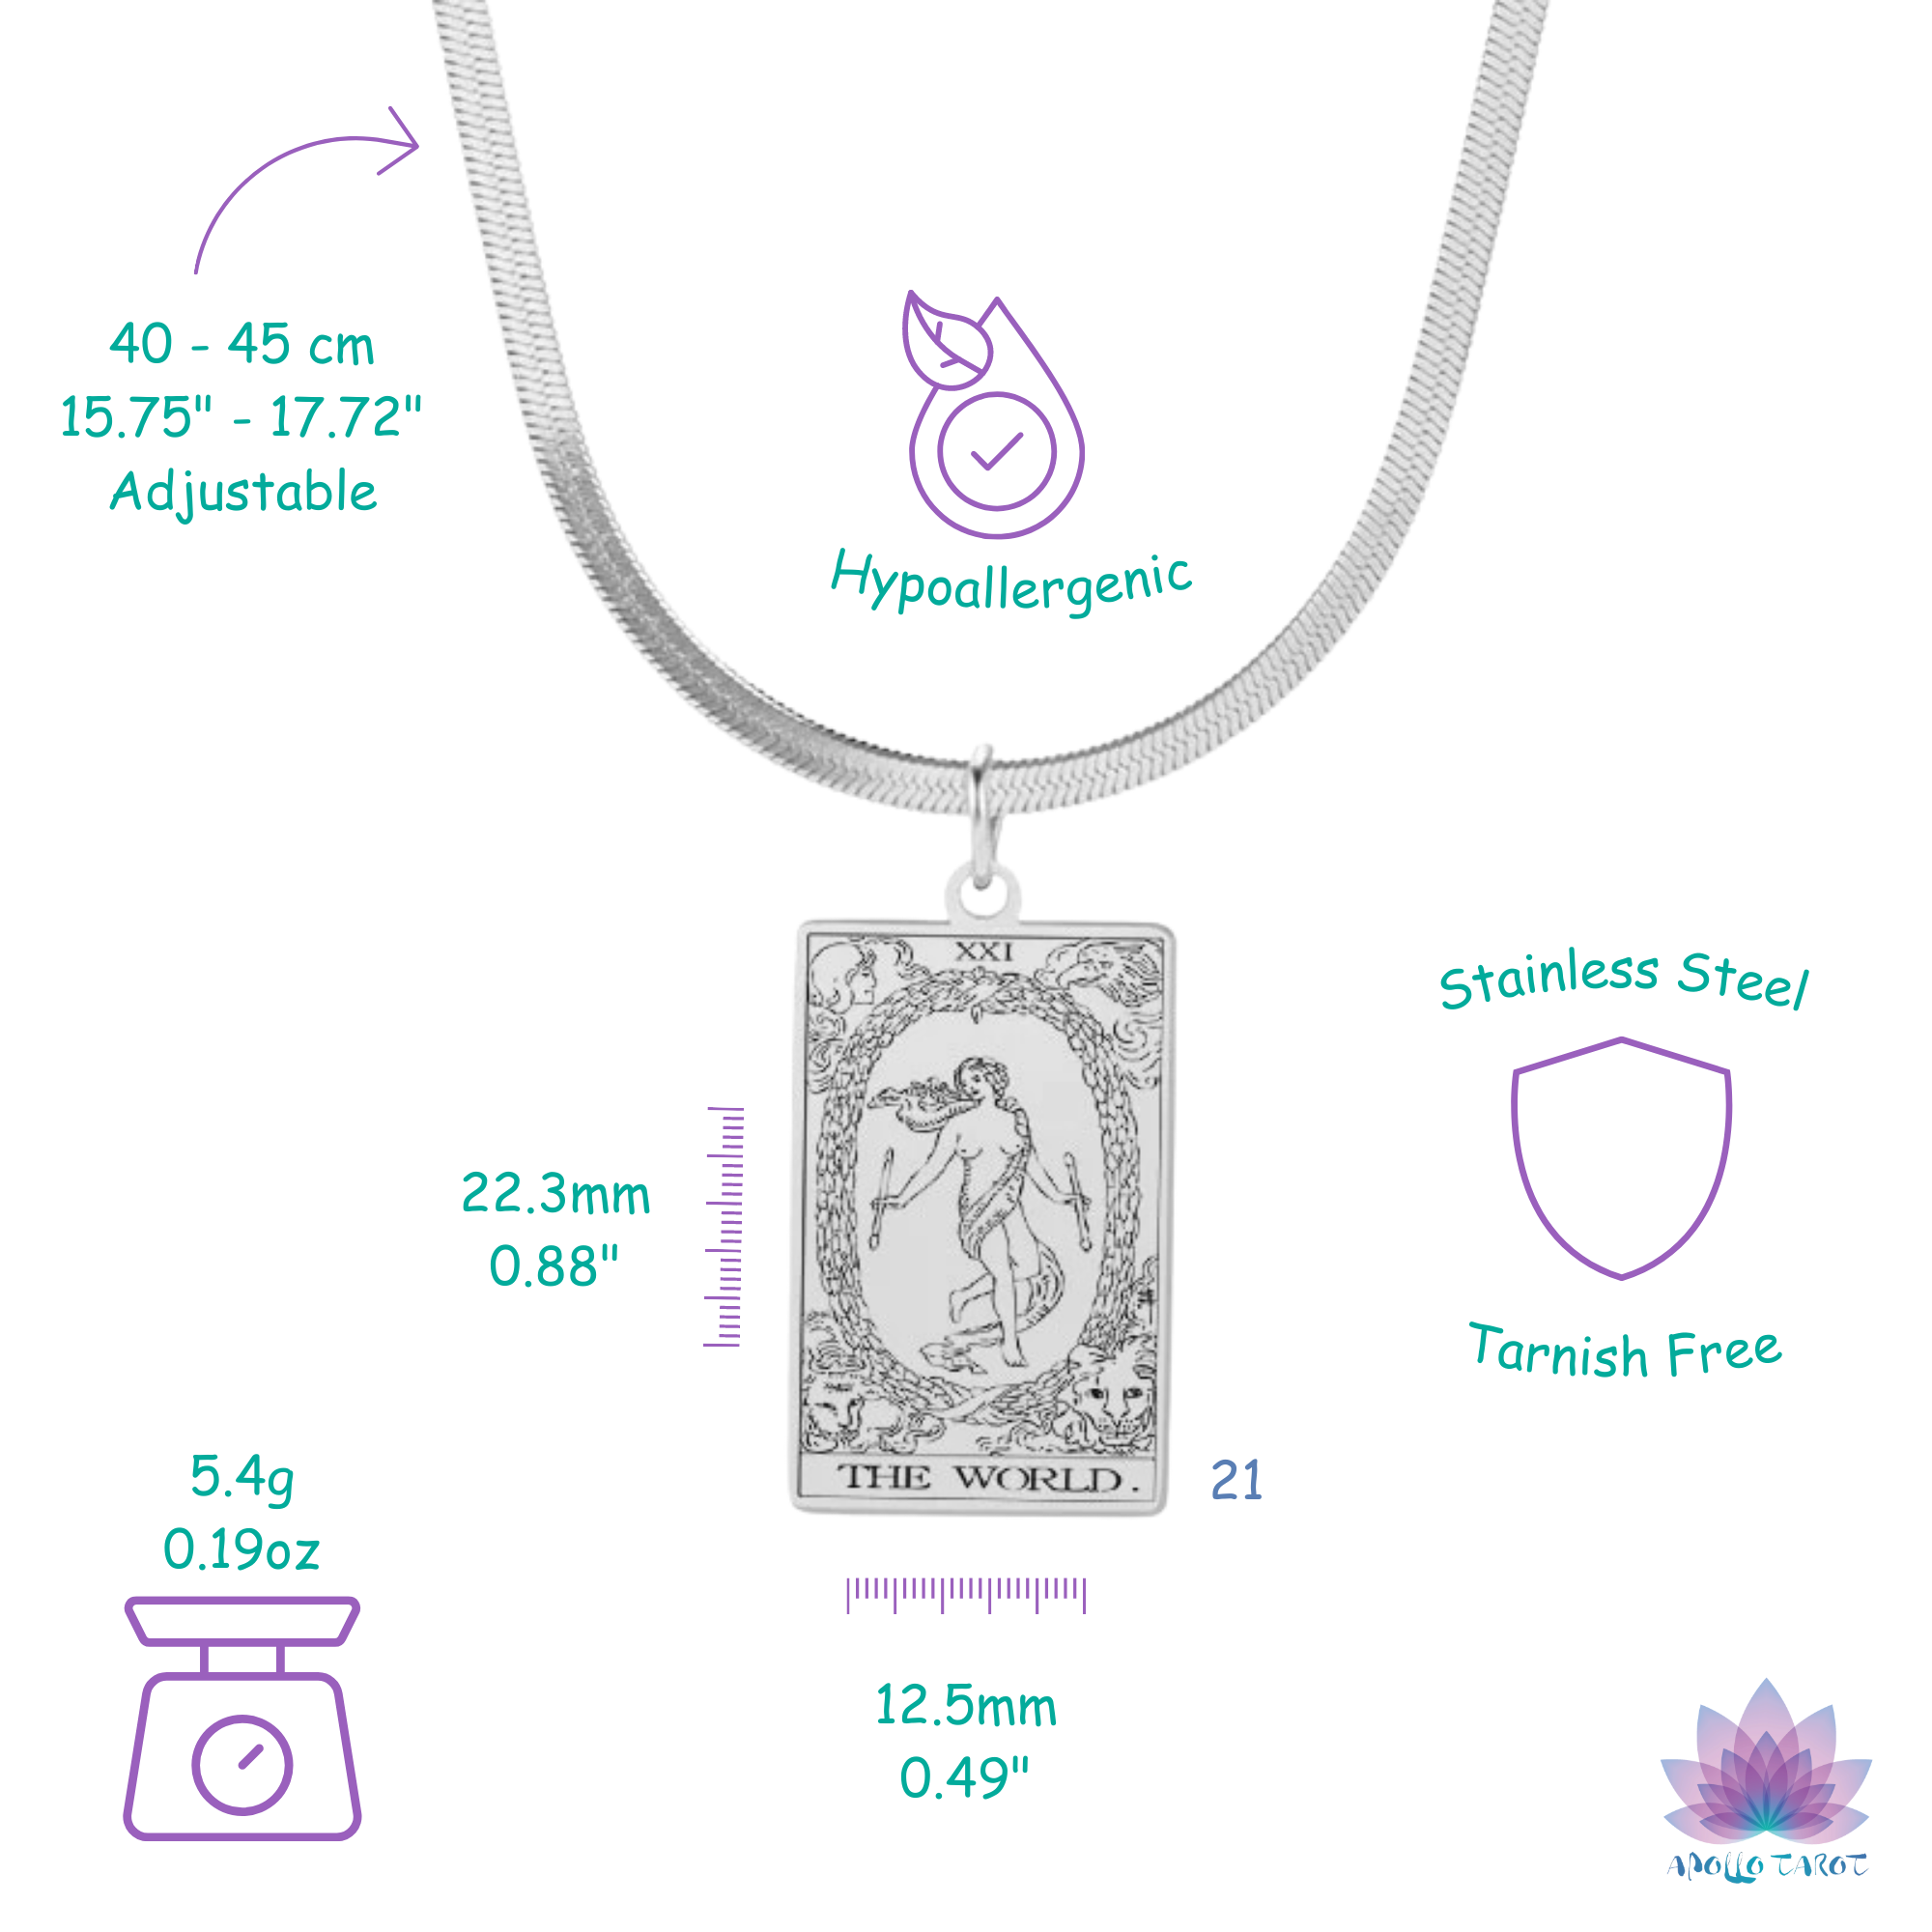 Tarot Card Snake Chain Choker Necklace Measures And Features | Apollo Tarot Jewelry Shop